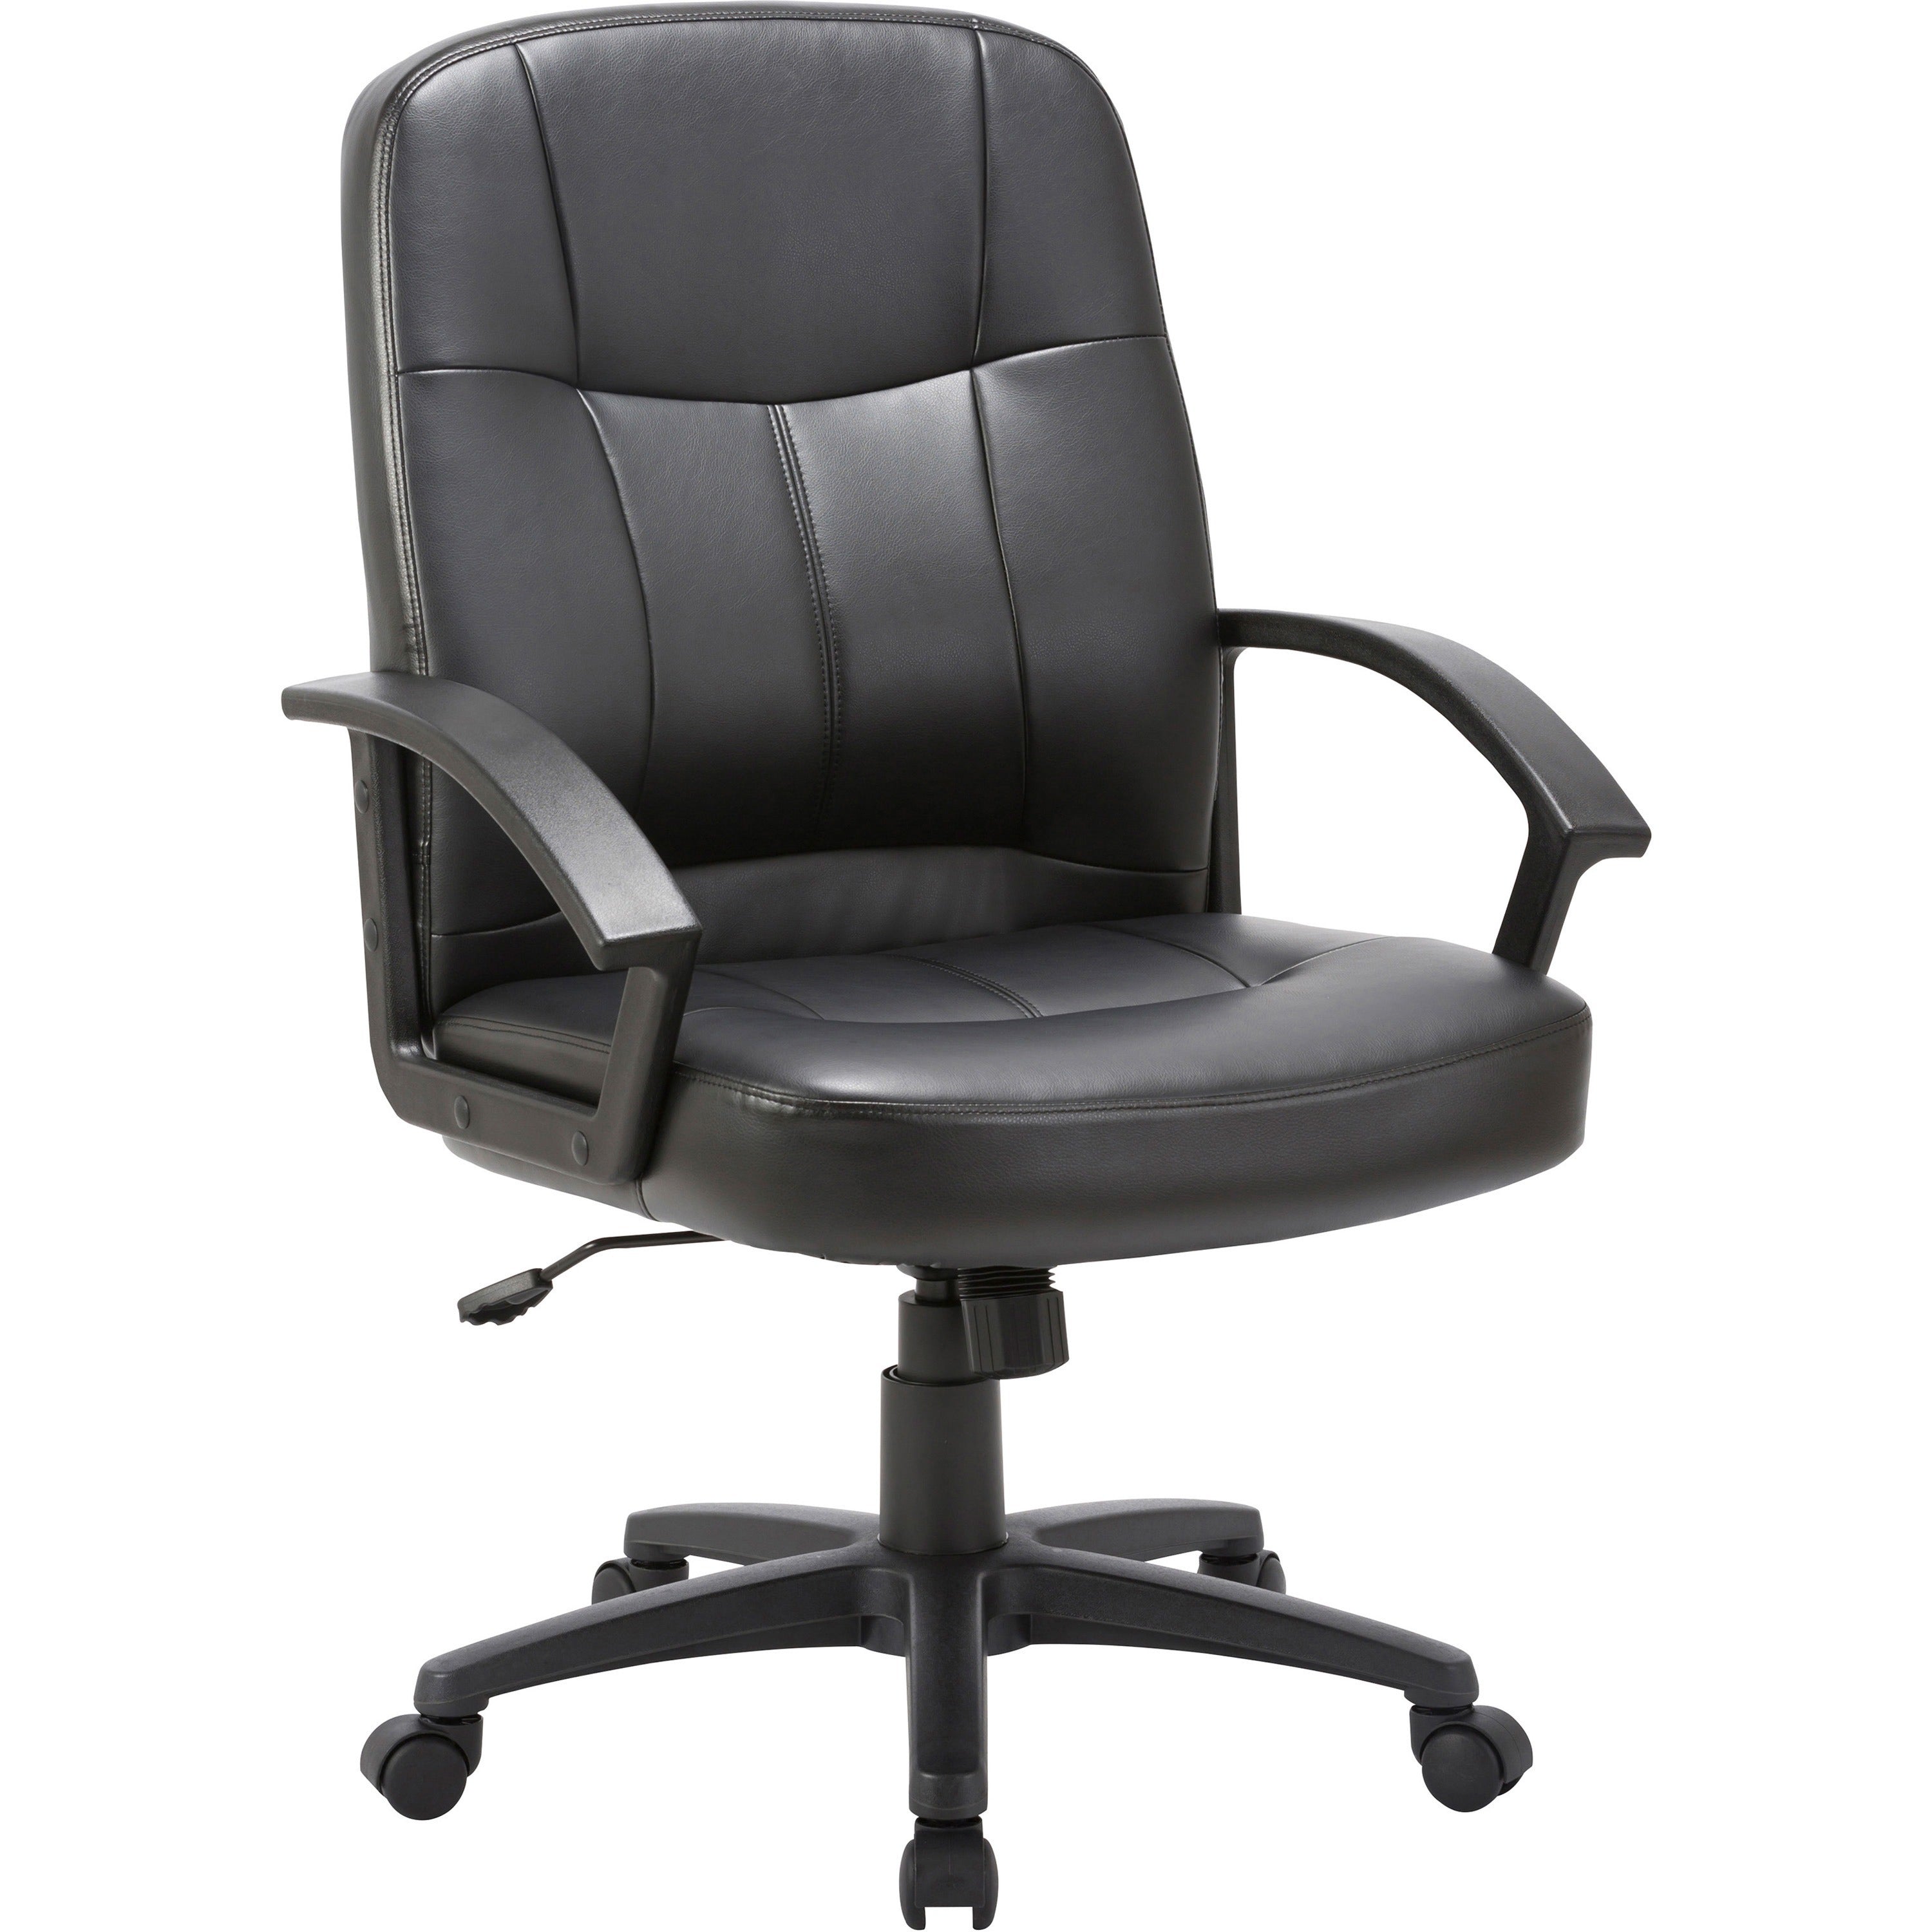 Lorell Chadwick Series Managerial Mid-Back Chair - Black Leather Seat - Black Frame - 5-star Base - Black - 1 Each - 